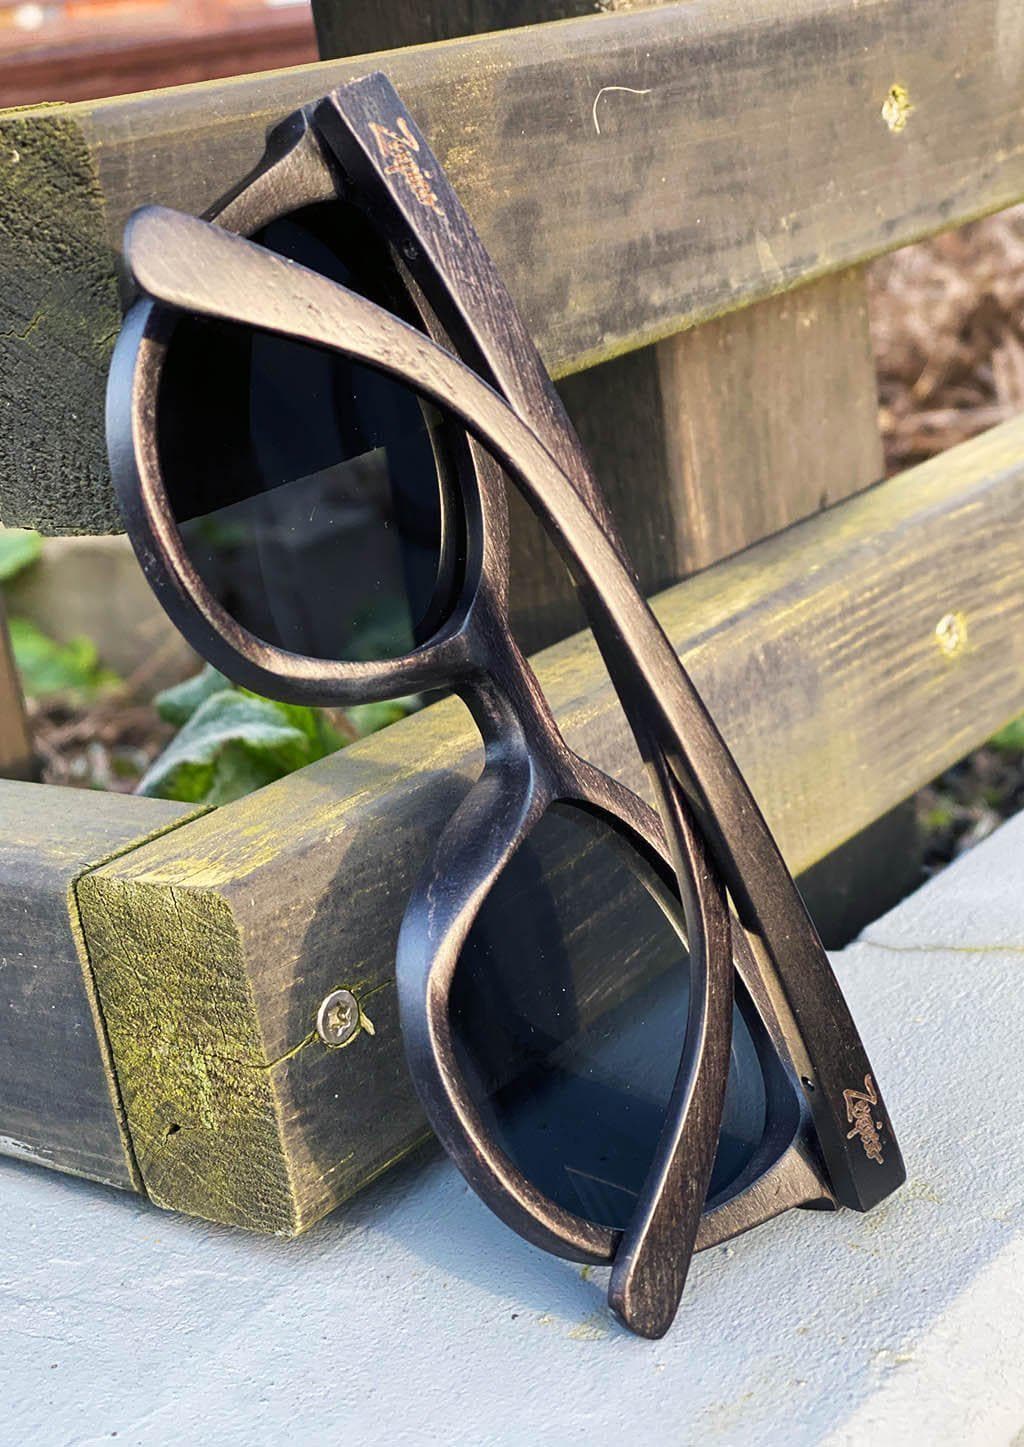 Eyewood - Madison - All wooden sunglasses with style. Details on the back.